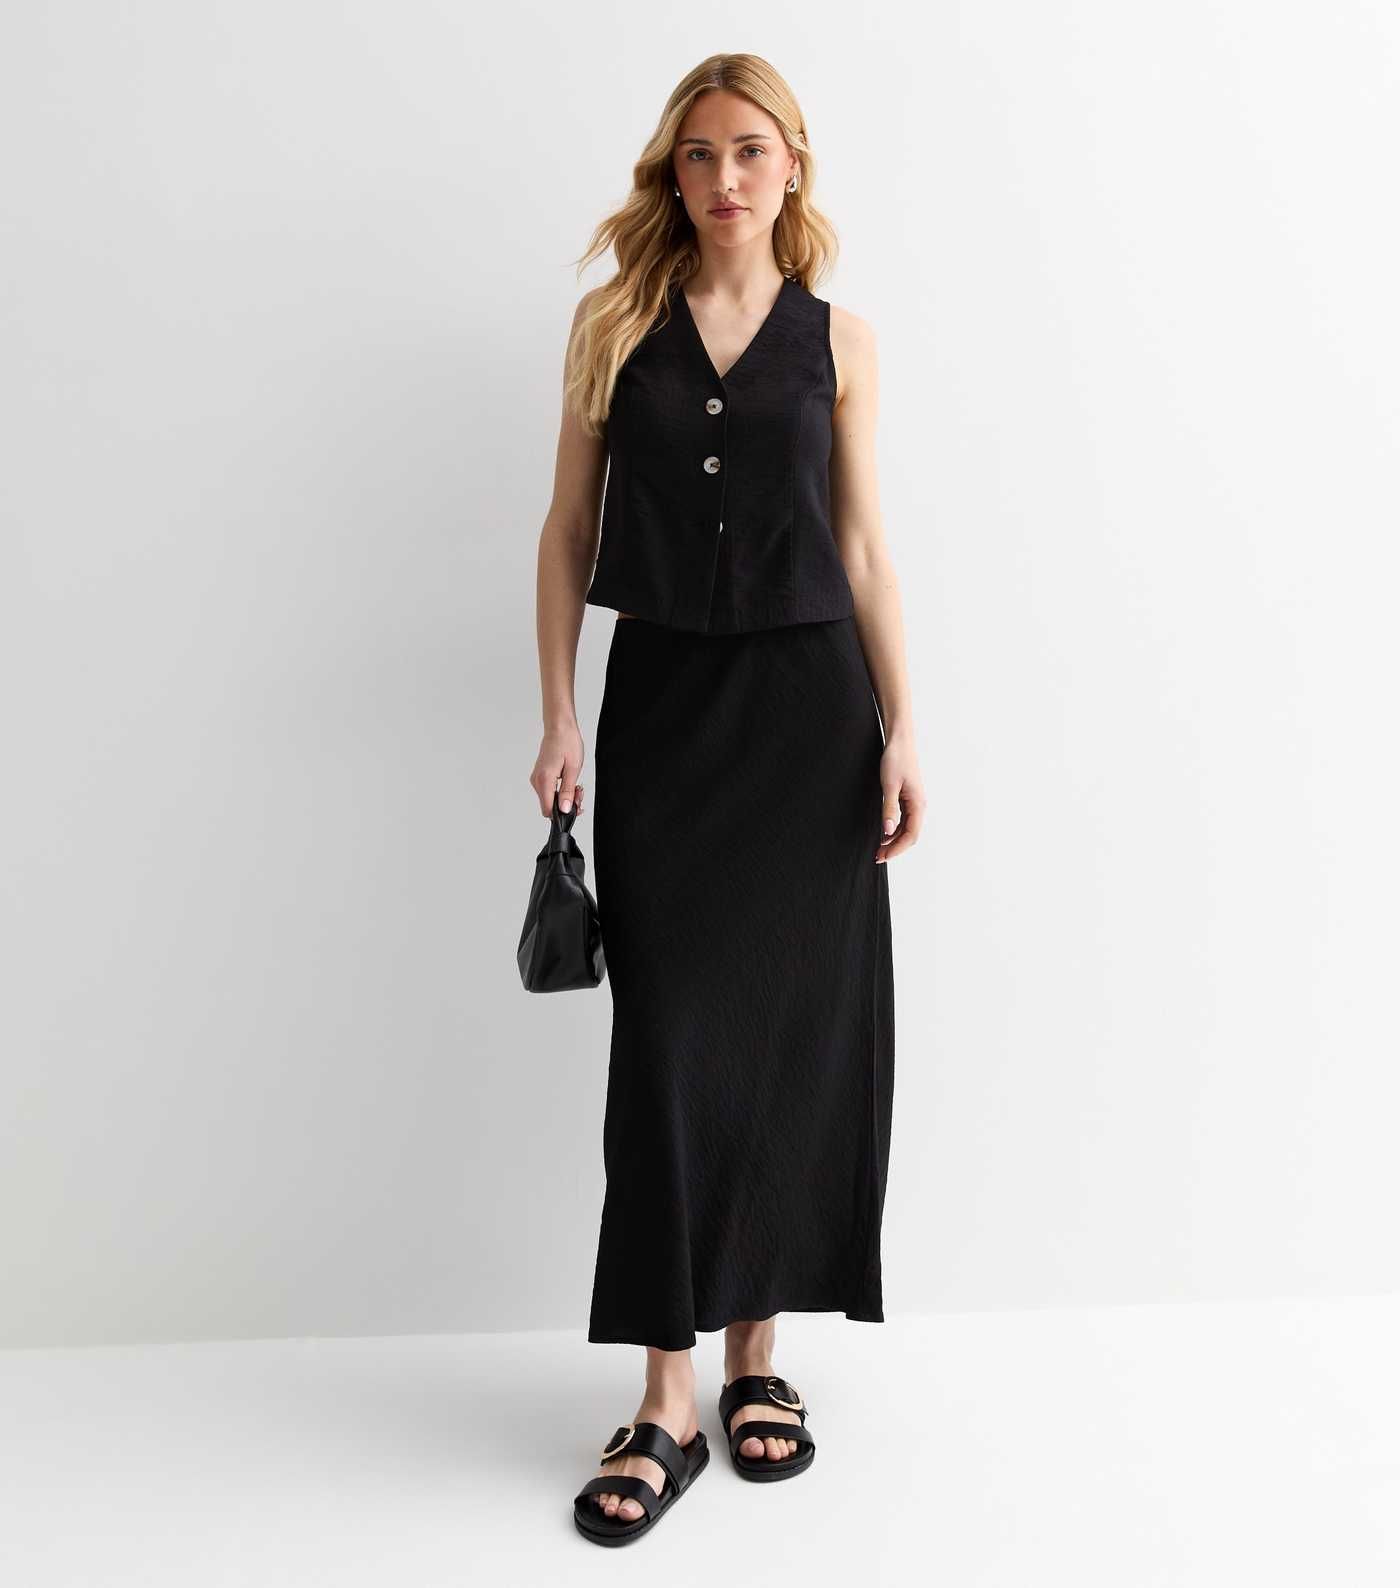 Black Textured Midi Skirt
						
						Add to Saved Items
						Remove from Saved Items | New Look (UK)